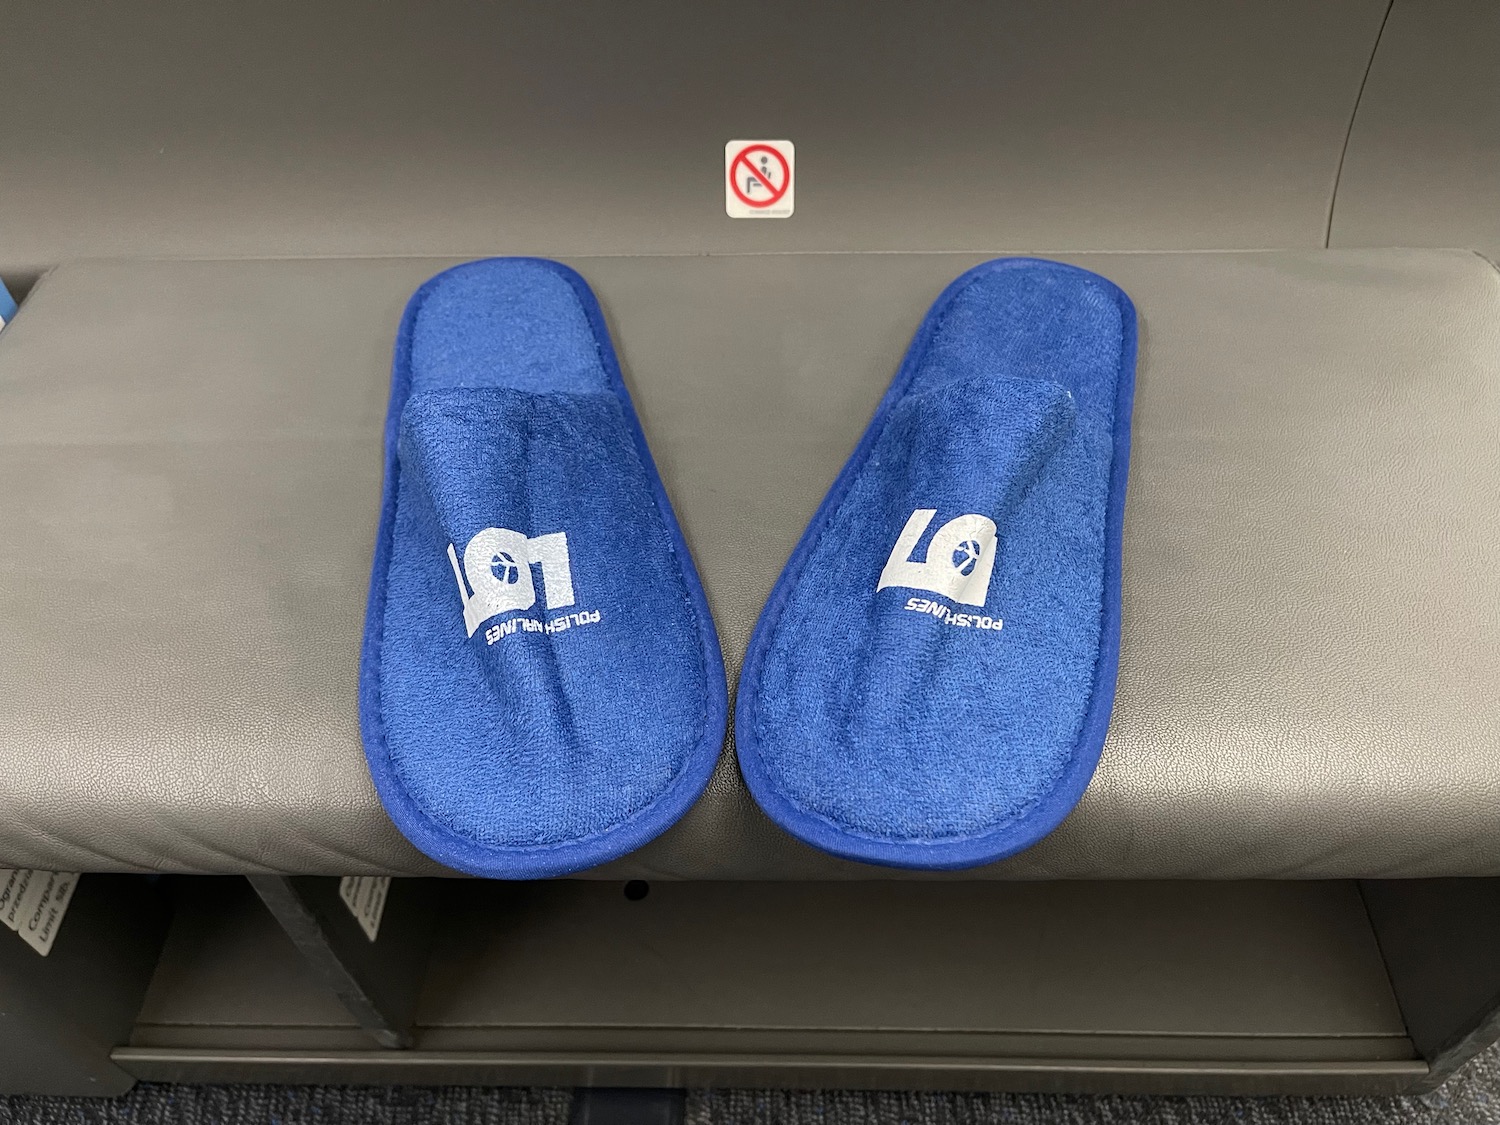 a pair of blue slippers on a grey bench